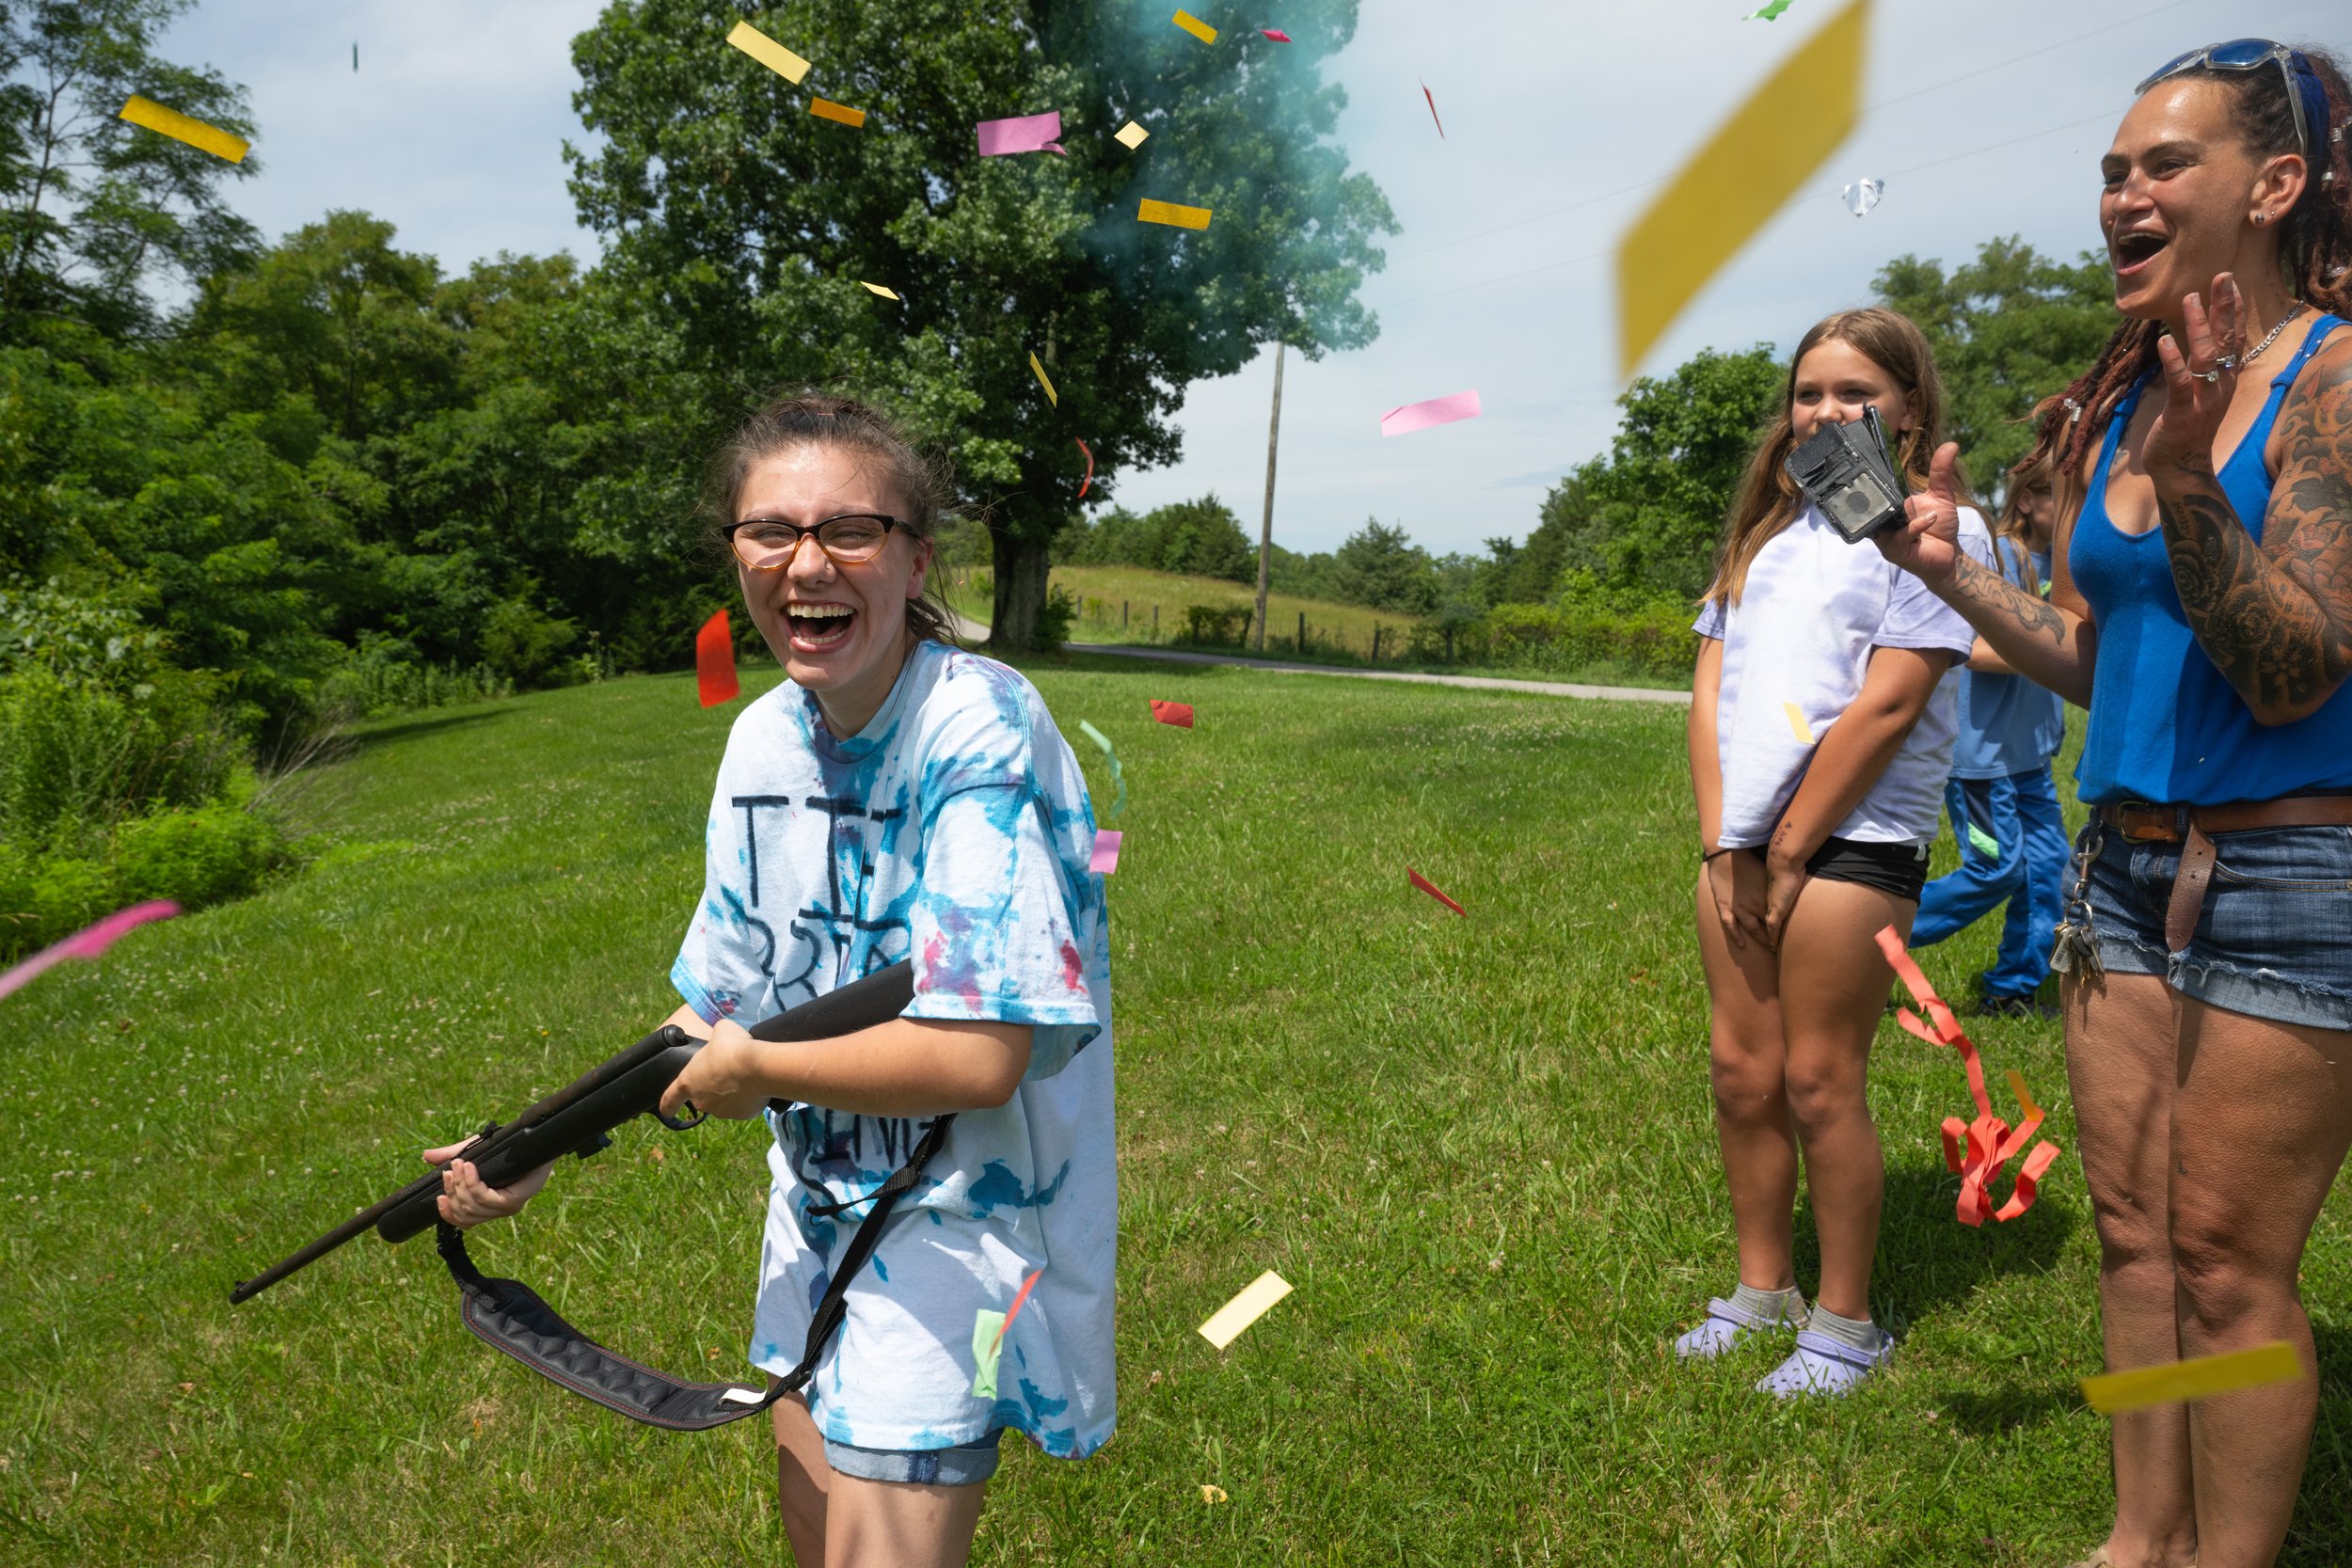  7/8/23 -- Cordova, Kentucky —  Amanda Aguilar, left, smiles after learning the sex of her baby at her gender reveal party near Cordova, KY on July 8, 2023. 